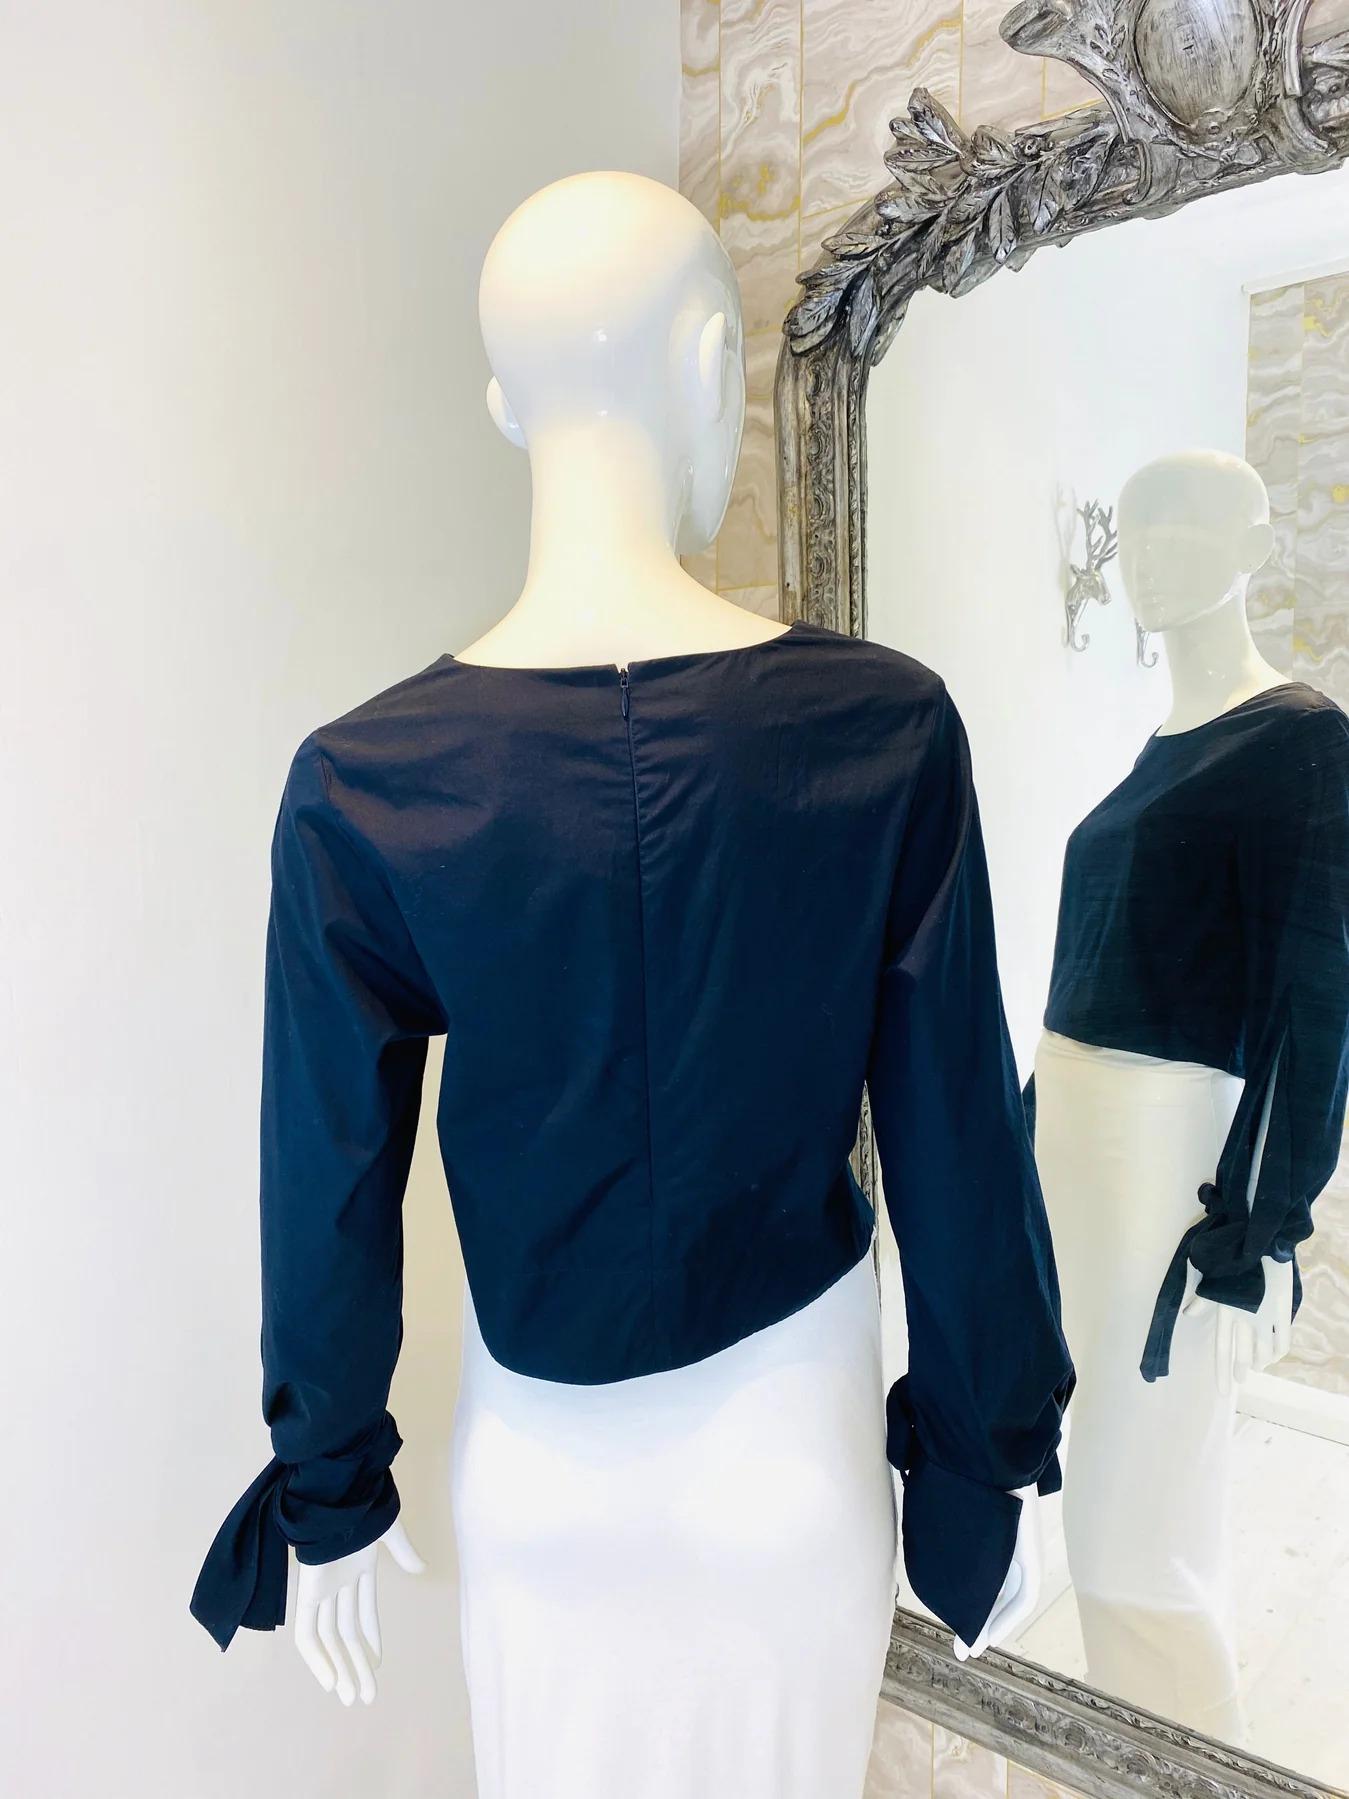 Phillip Lim Cotton Top

Navy blue cropped top with tie cuffs.

Additional information:
Size – 6UK
Condition – Very Good